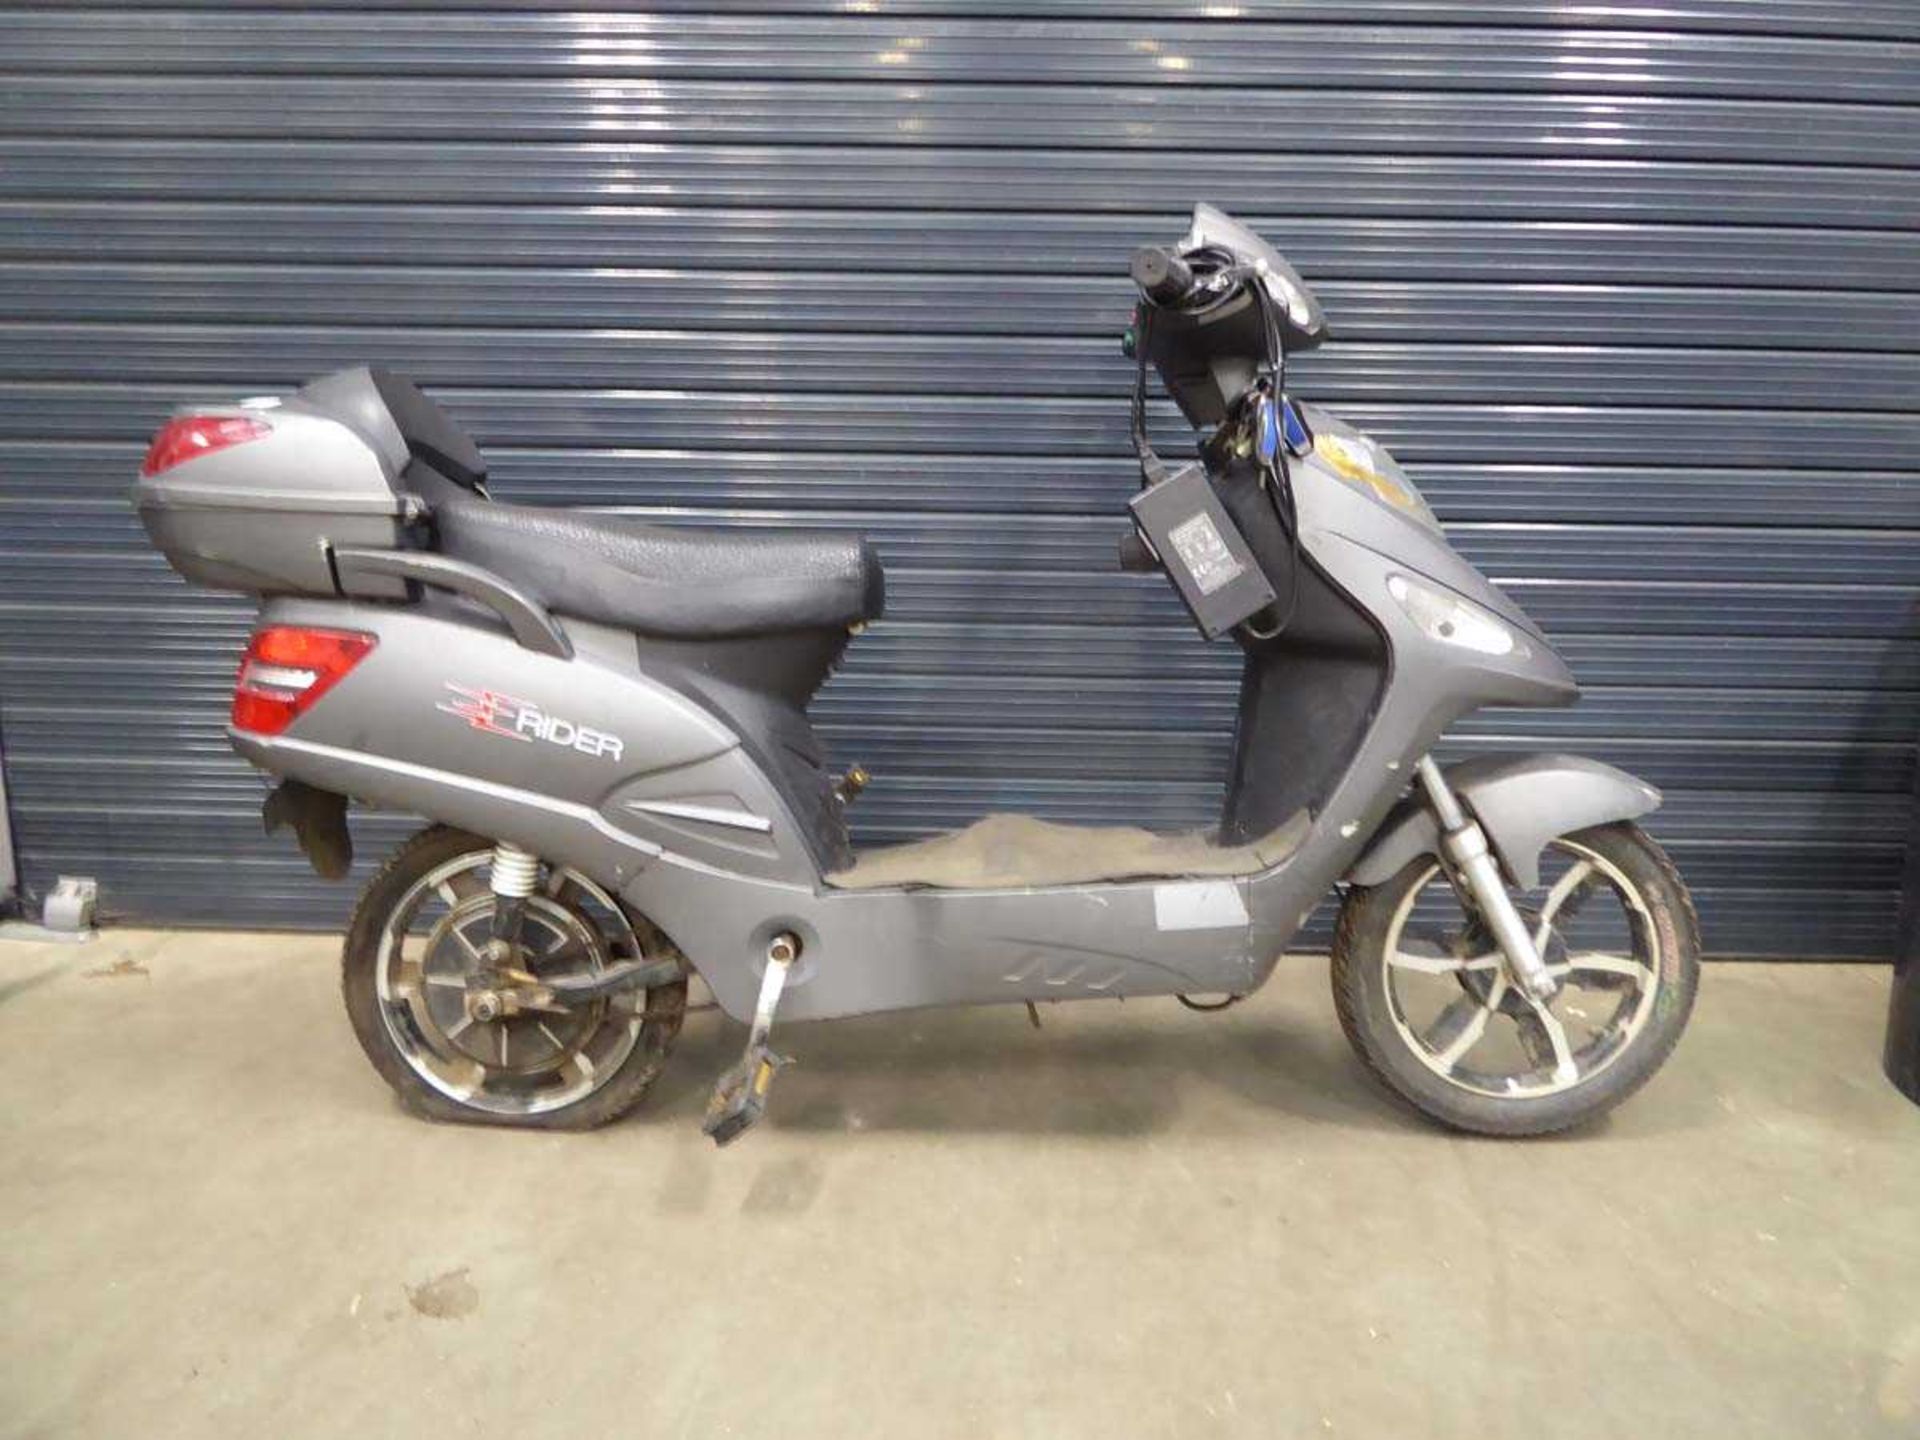 E-Rider electric moped, in need of repair